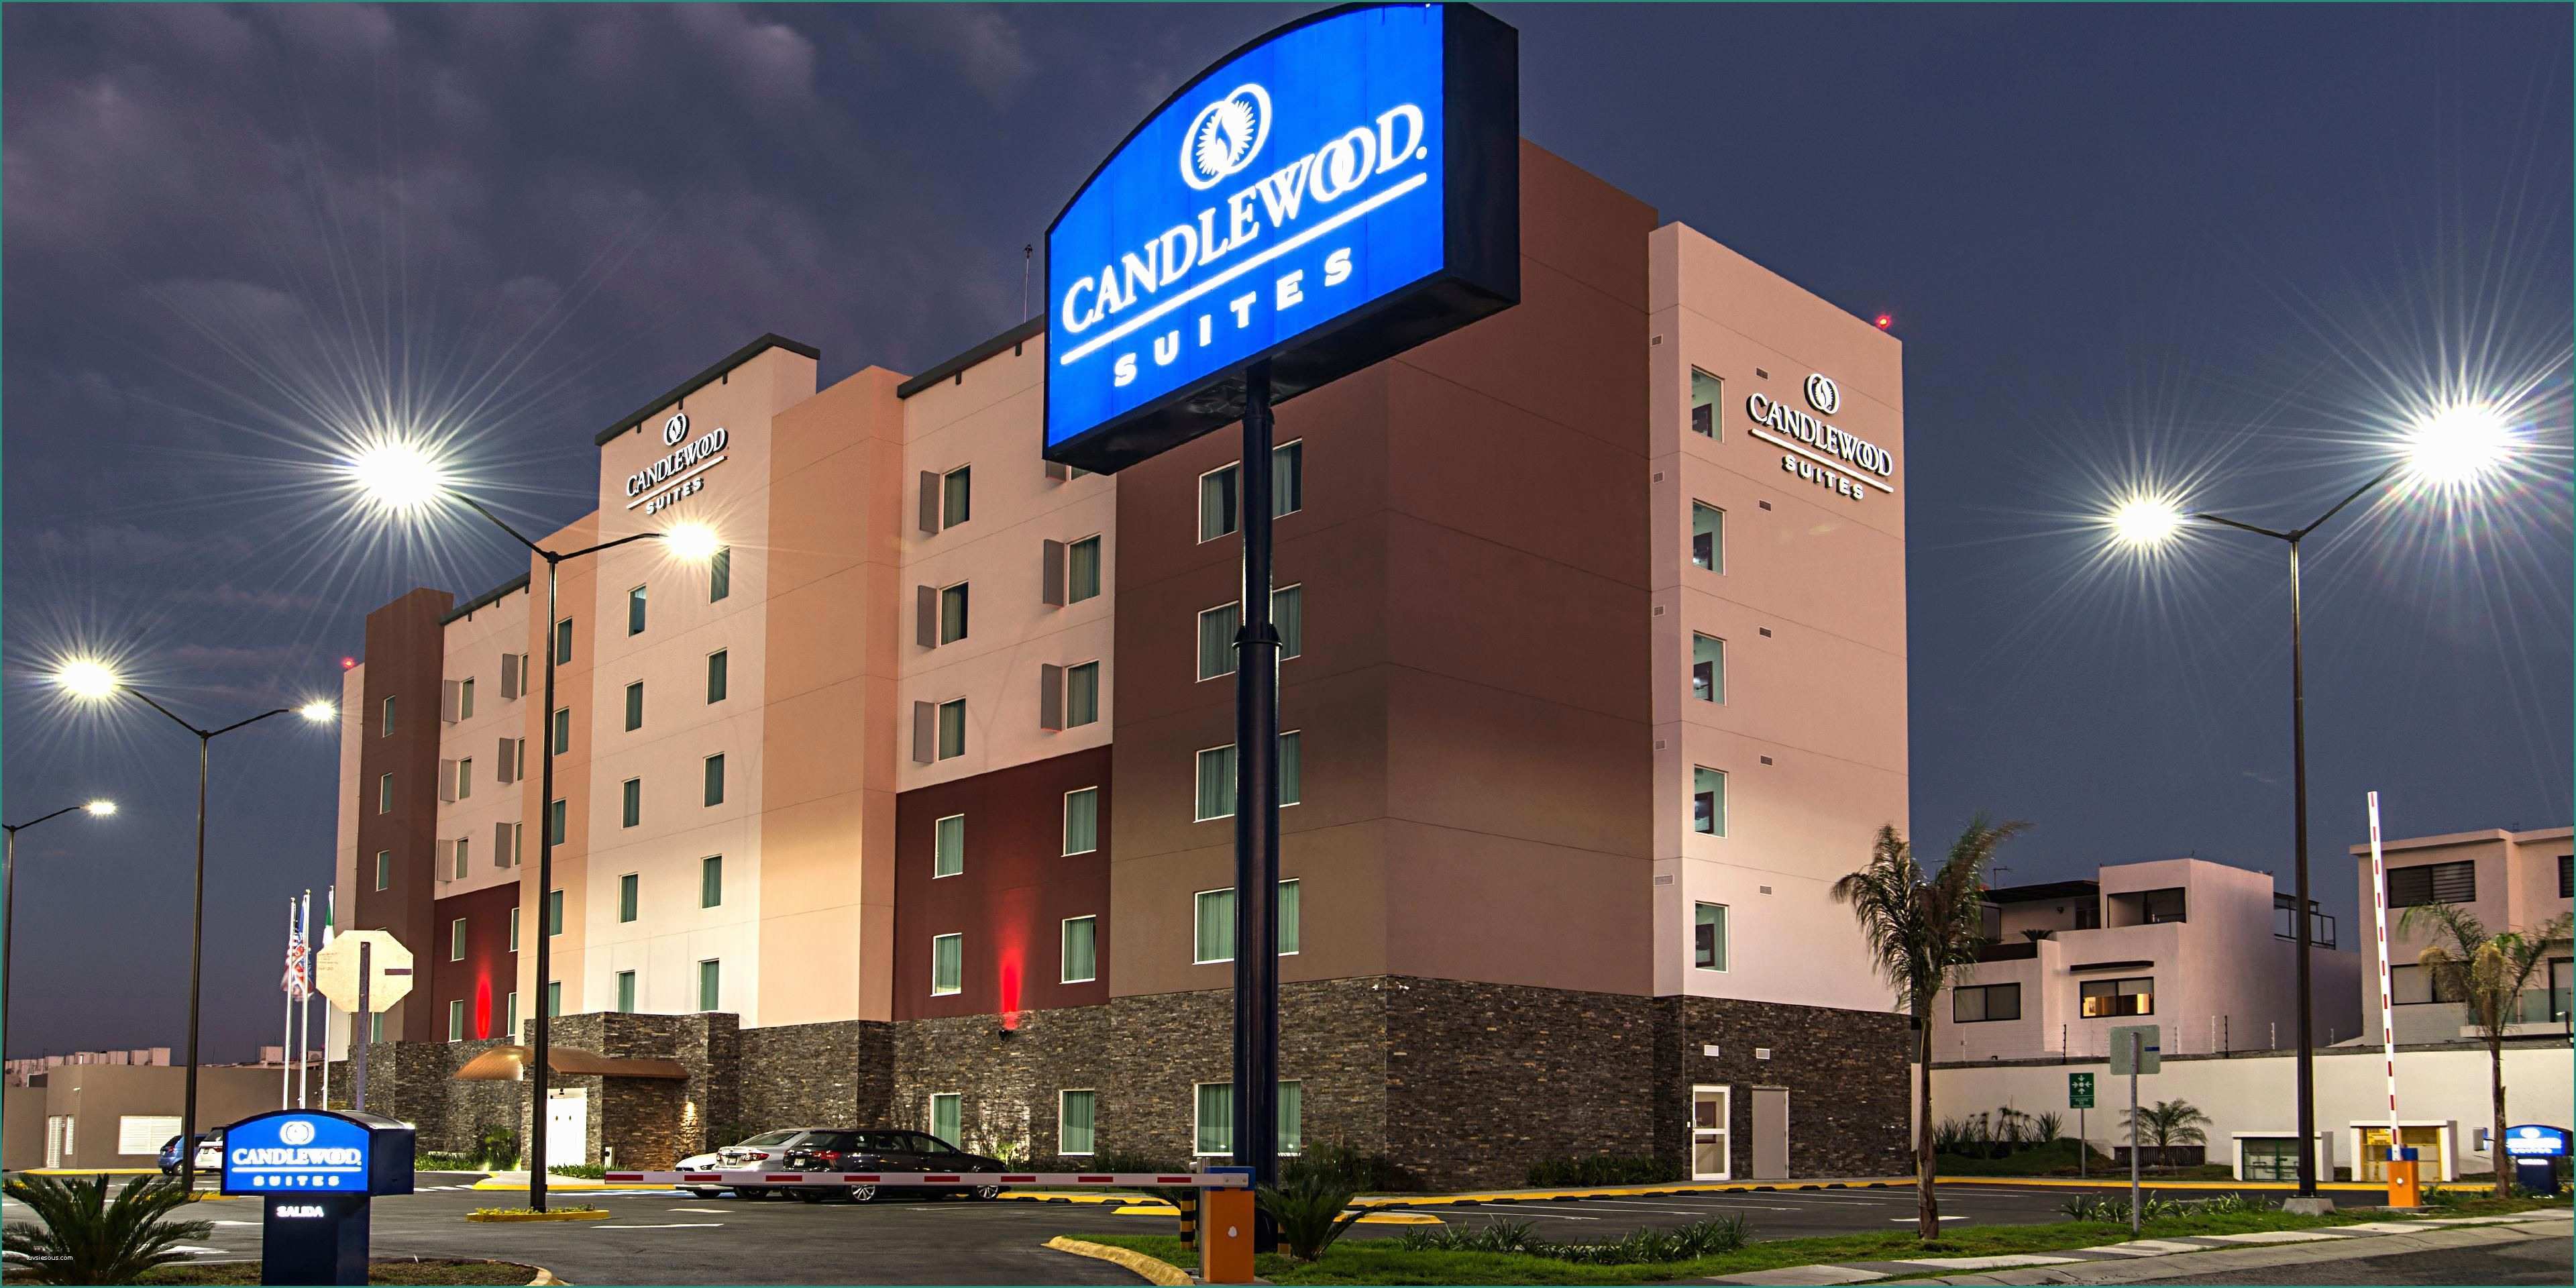 Candlewood Suites Queretaro Juriquilla Extended Stay Hotel in